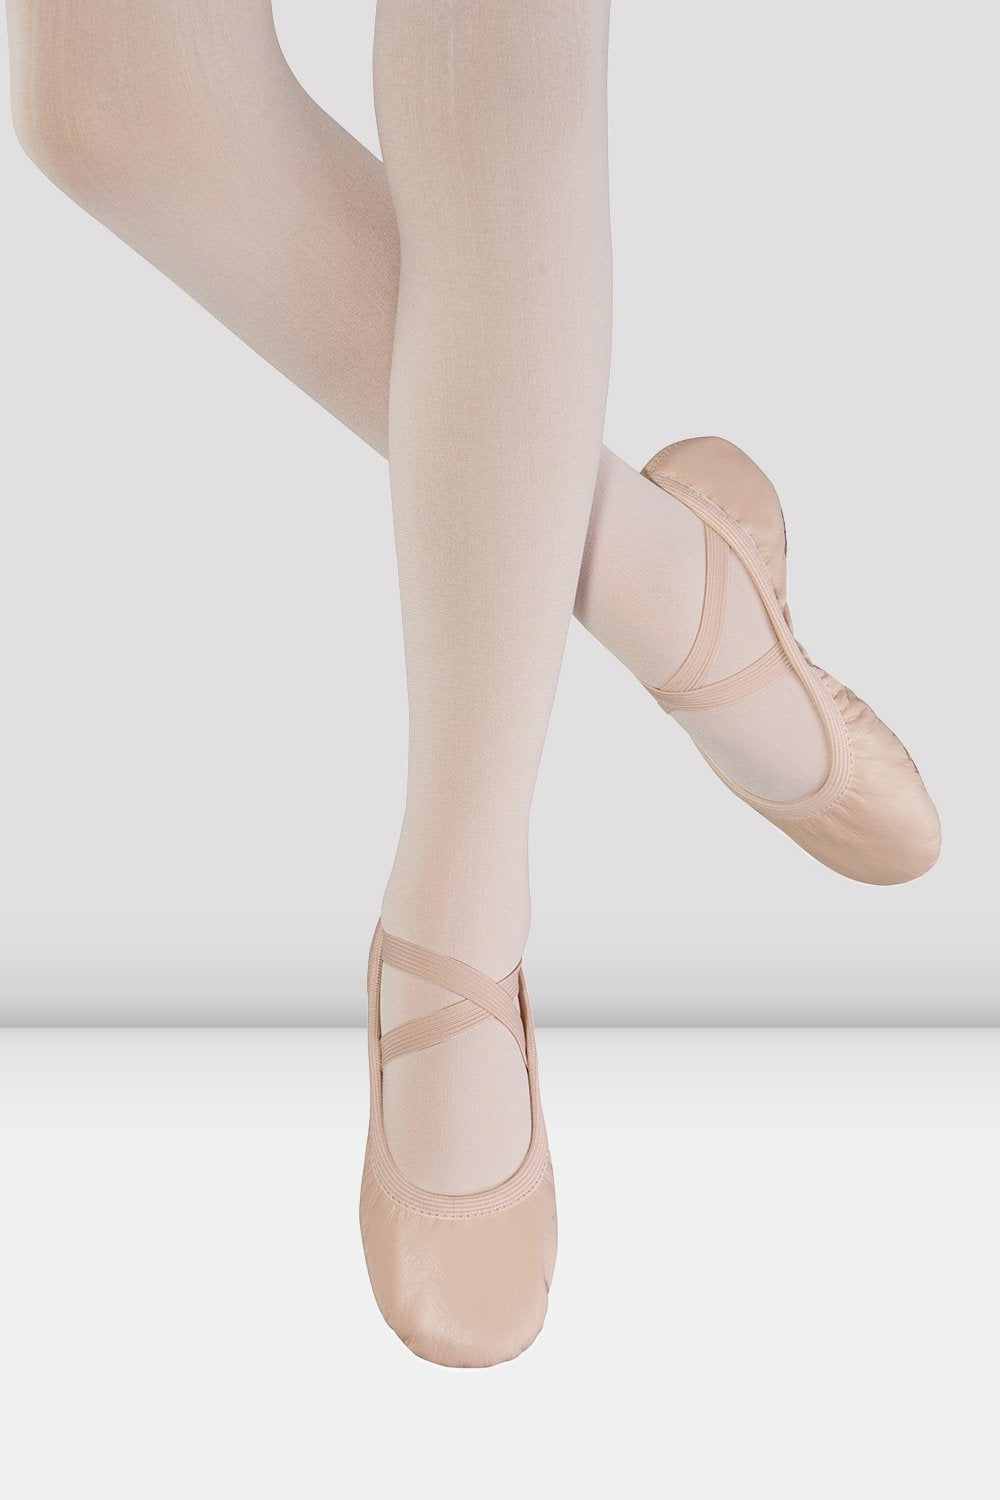 ballet shoes for adults near me